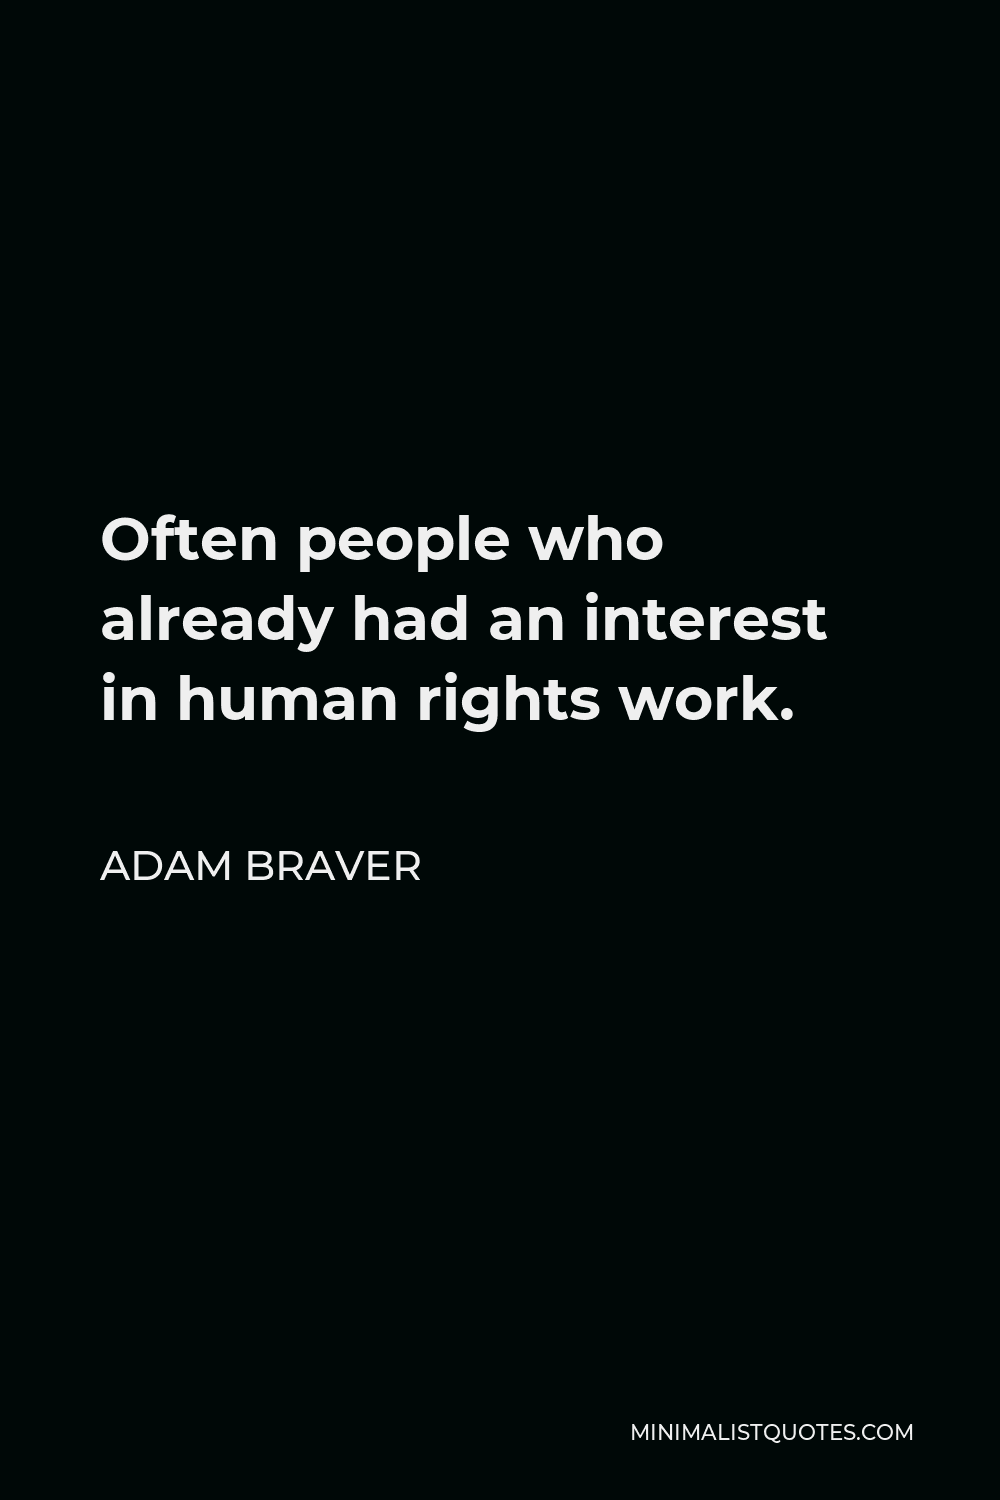 Adam Braver Quote - Often people who already had an interest in human rights work.